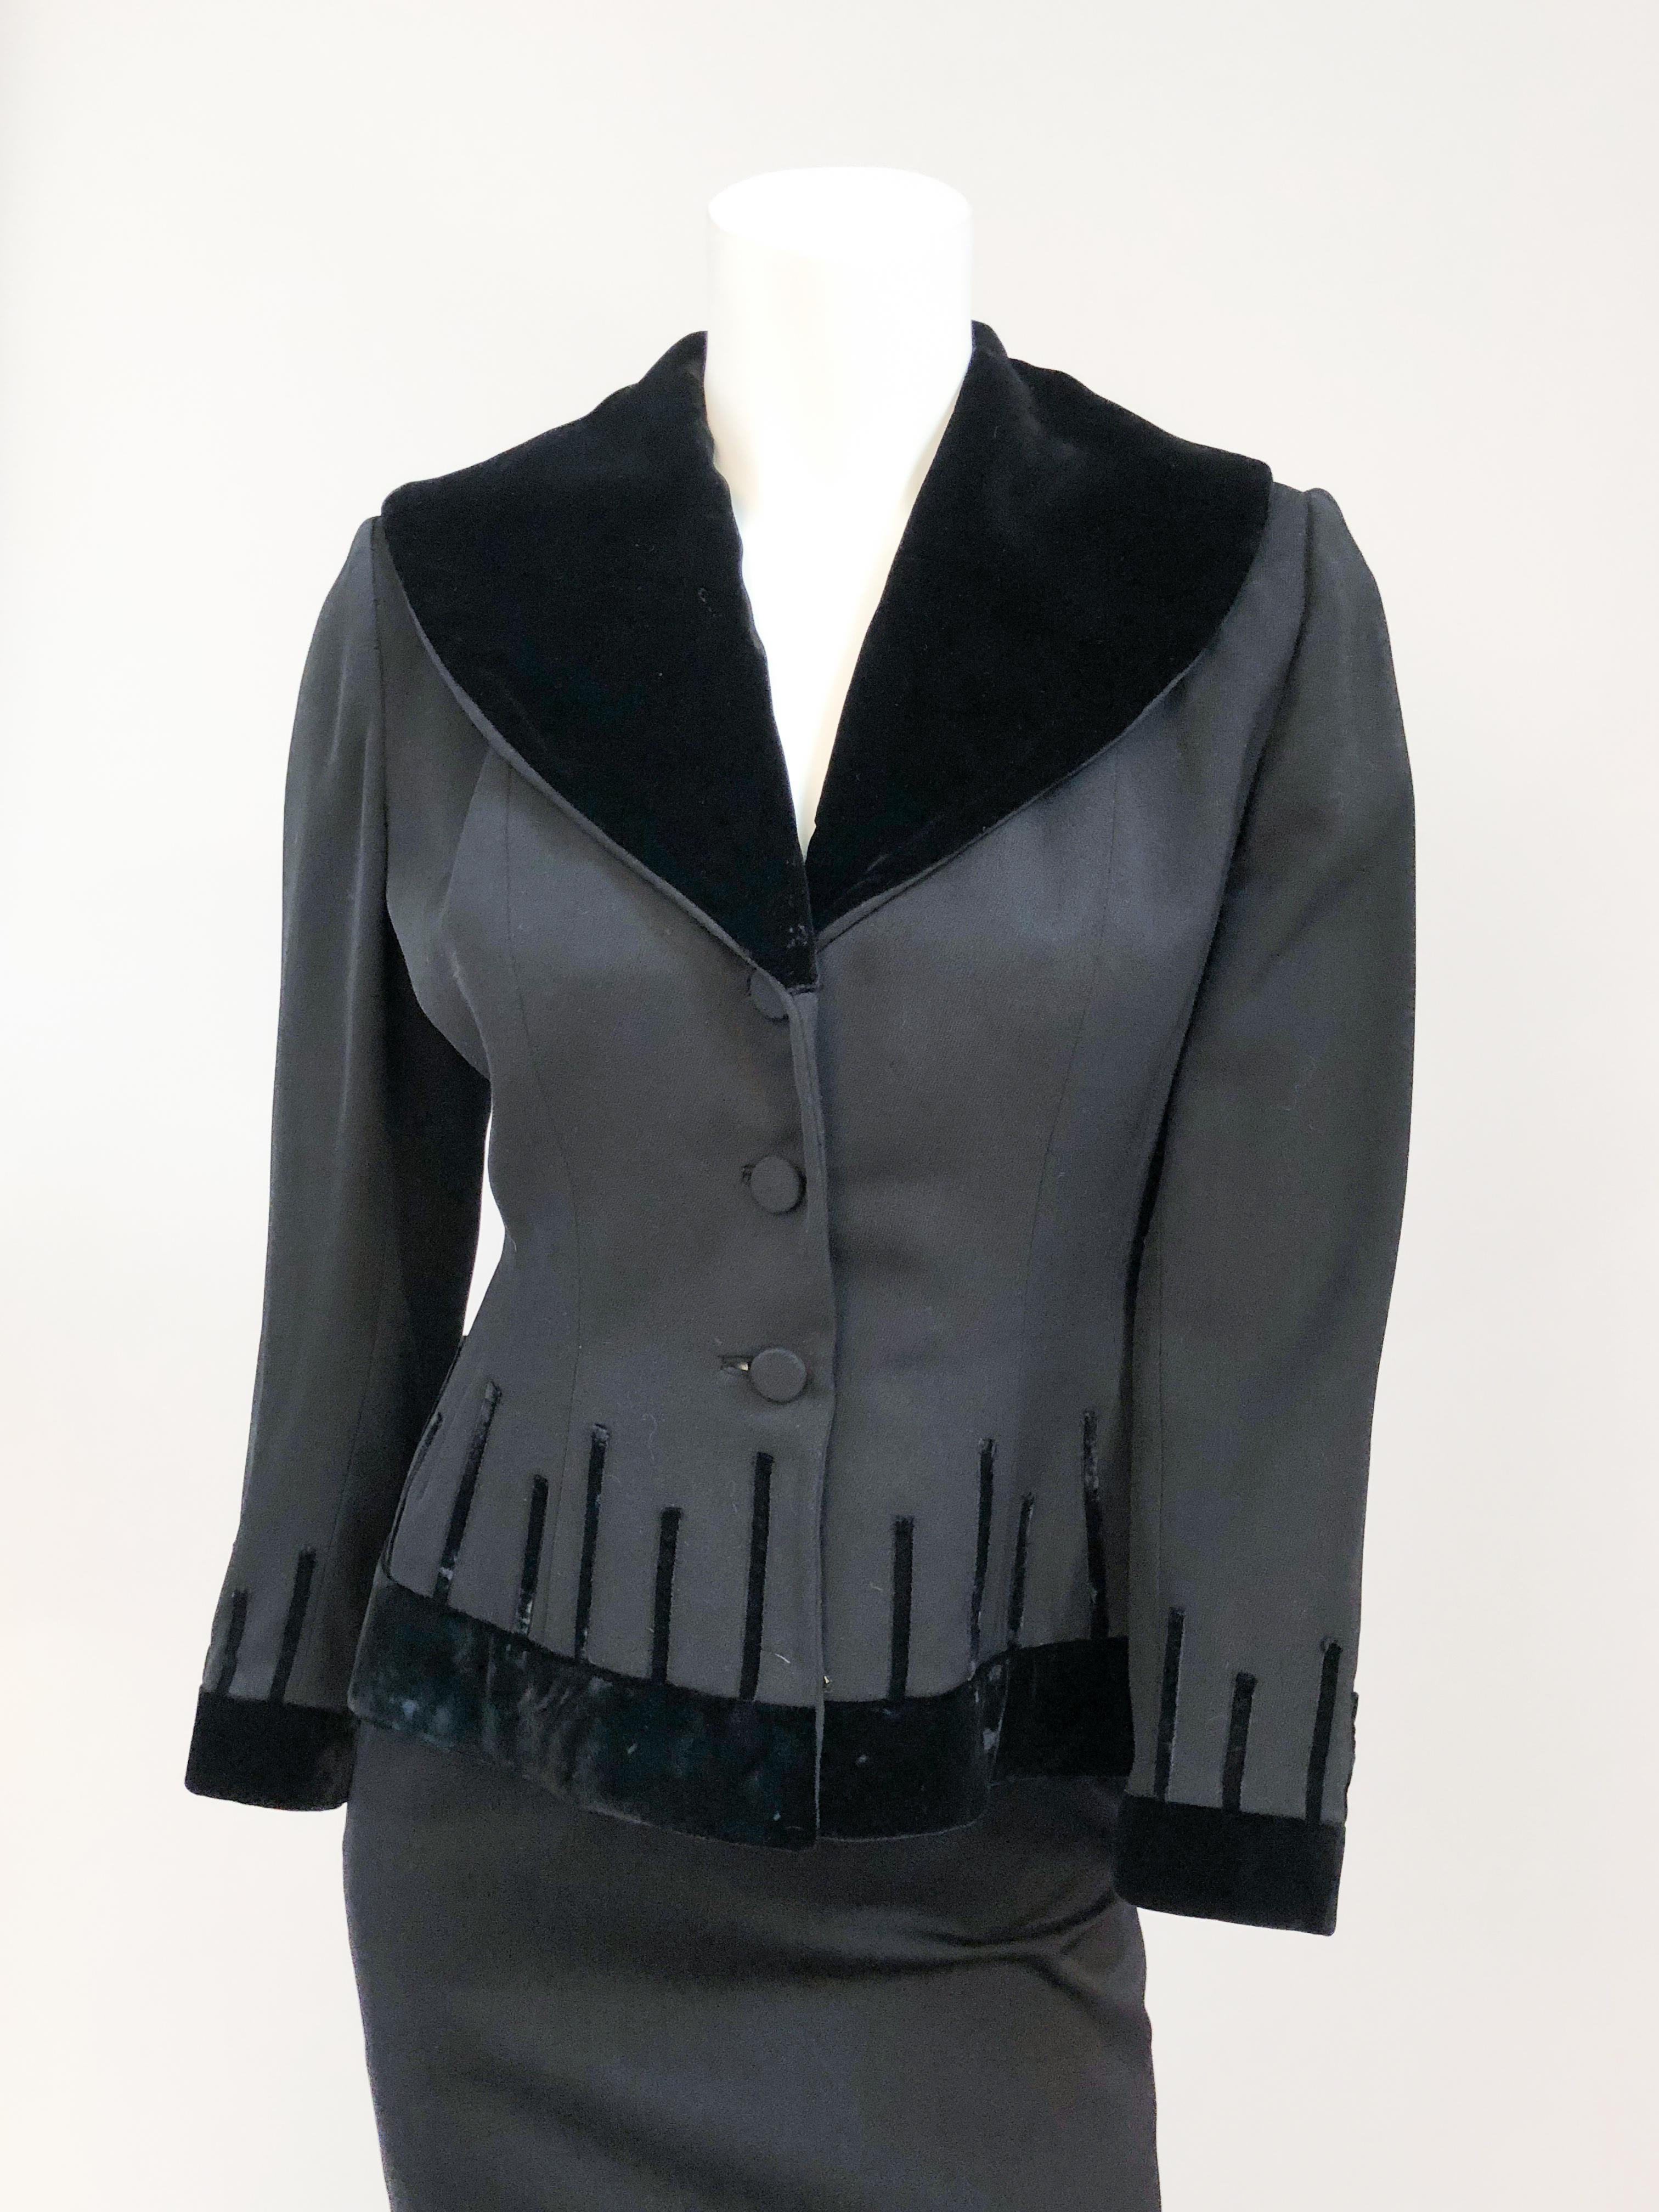 1940's Lilli Annette Black Suit With Velvet Accents. Black suit set with oversized velvet collar that hangs off the back, velvet cuffs and at the hem of the jacket. 